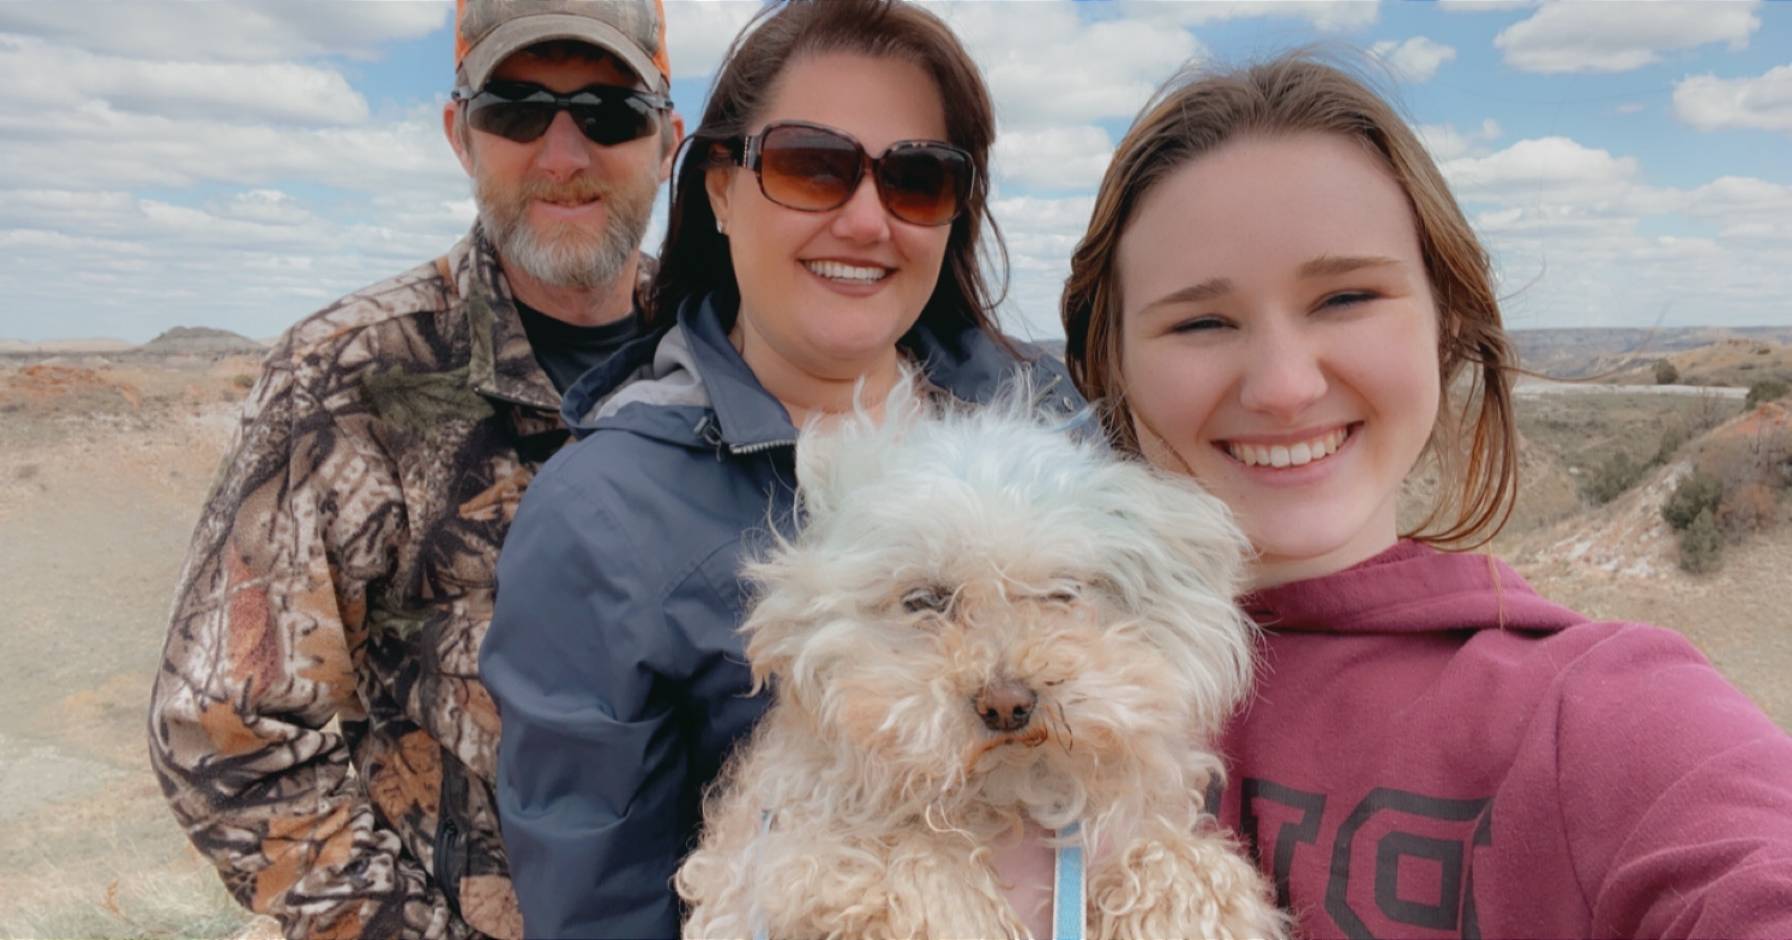 Nicole Proctor with husband, daughter and dog